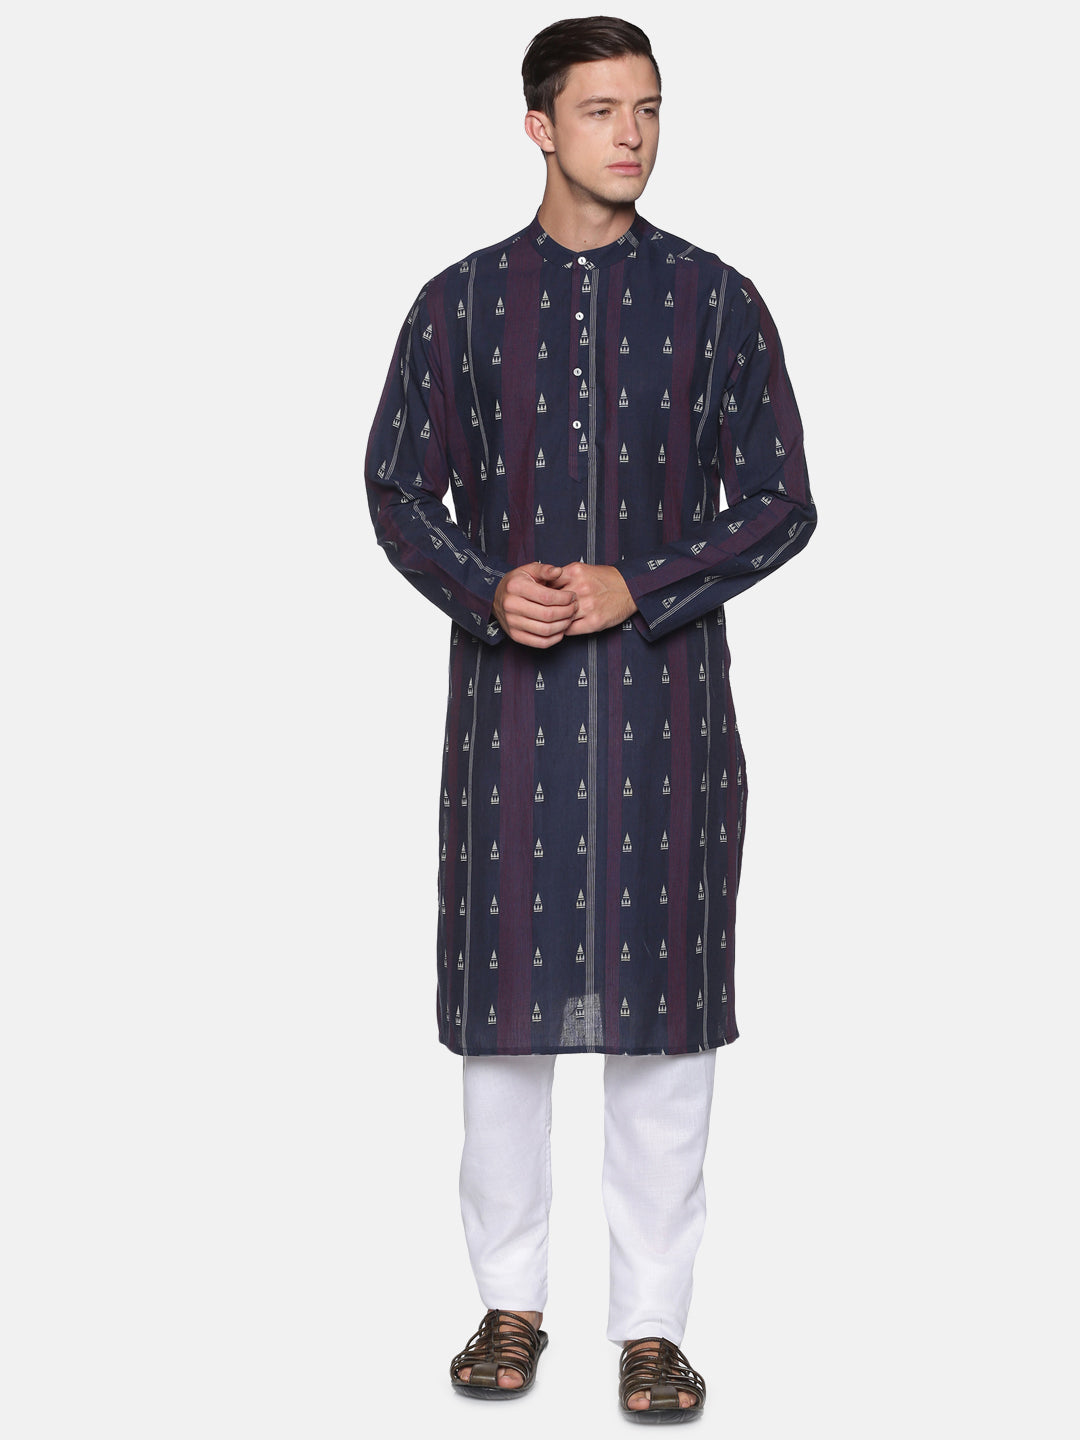 Navy blue striped woven designed kurta with both side pockets